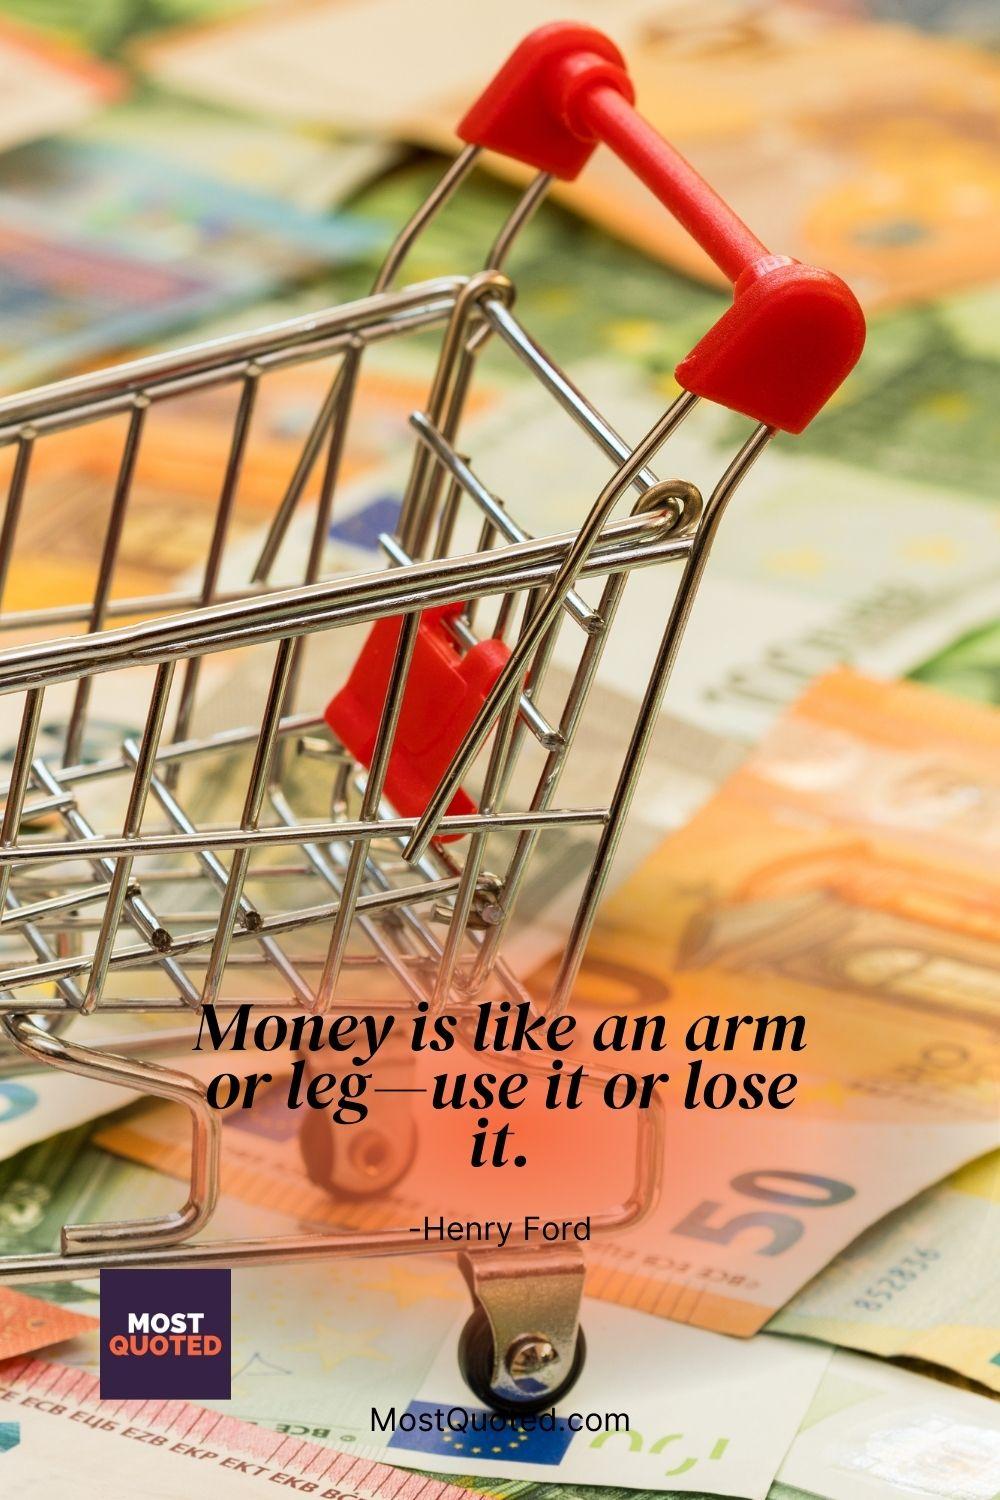 Money is like an arm or leg—use it or lose it. - Henry Ford